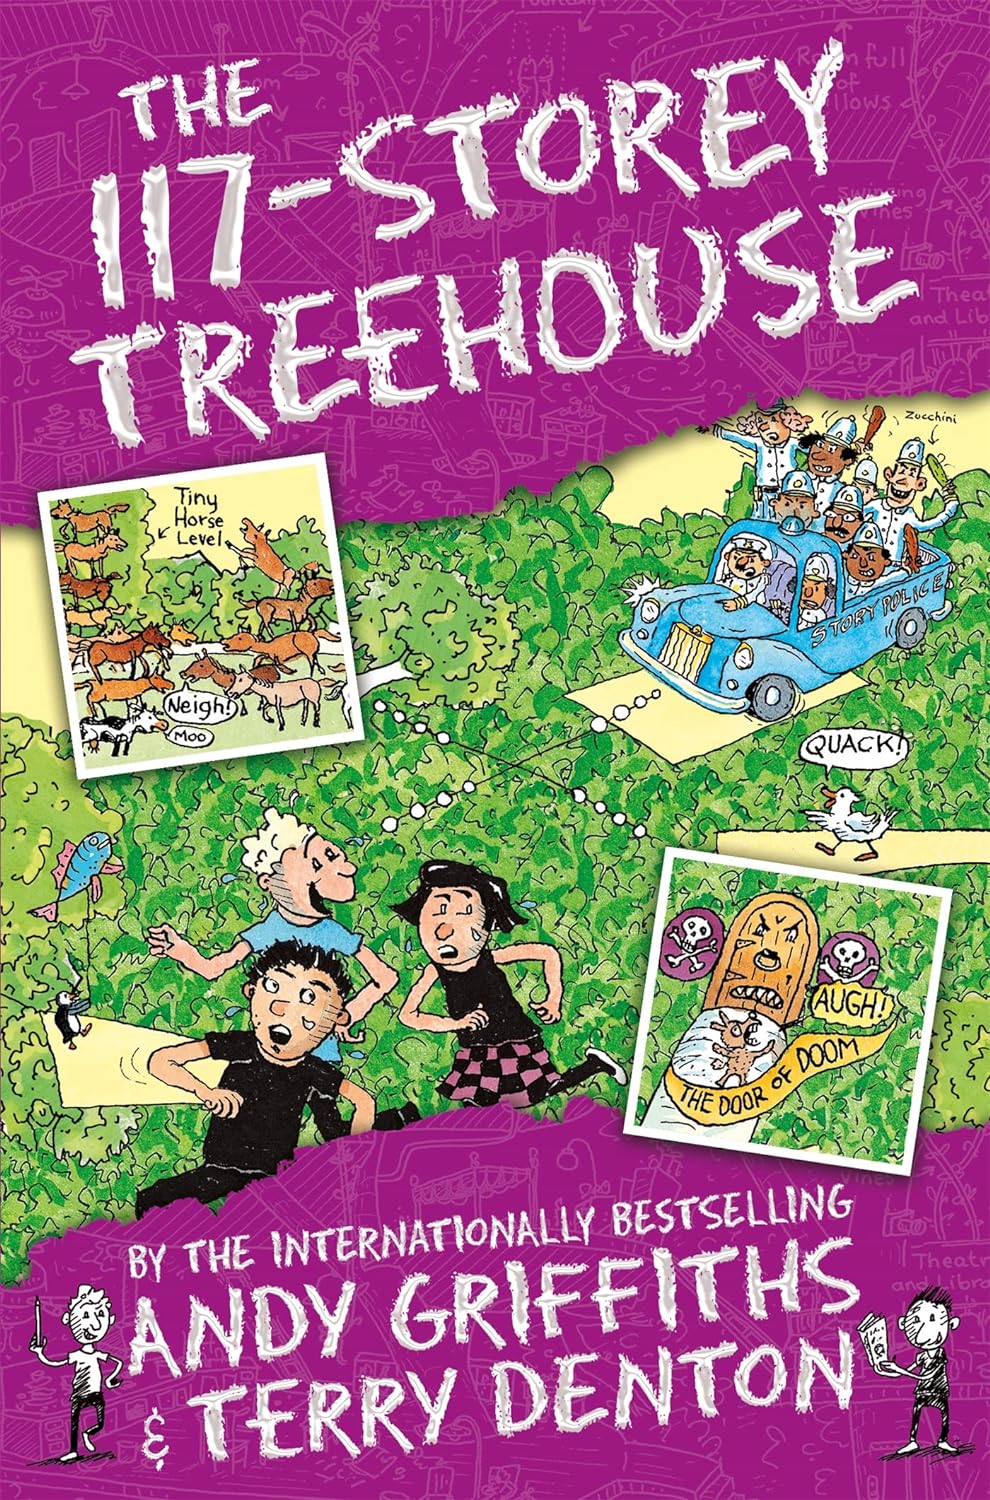 The 117-Storey Treehouse By Andy Griffiths